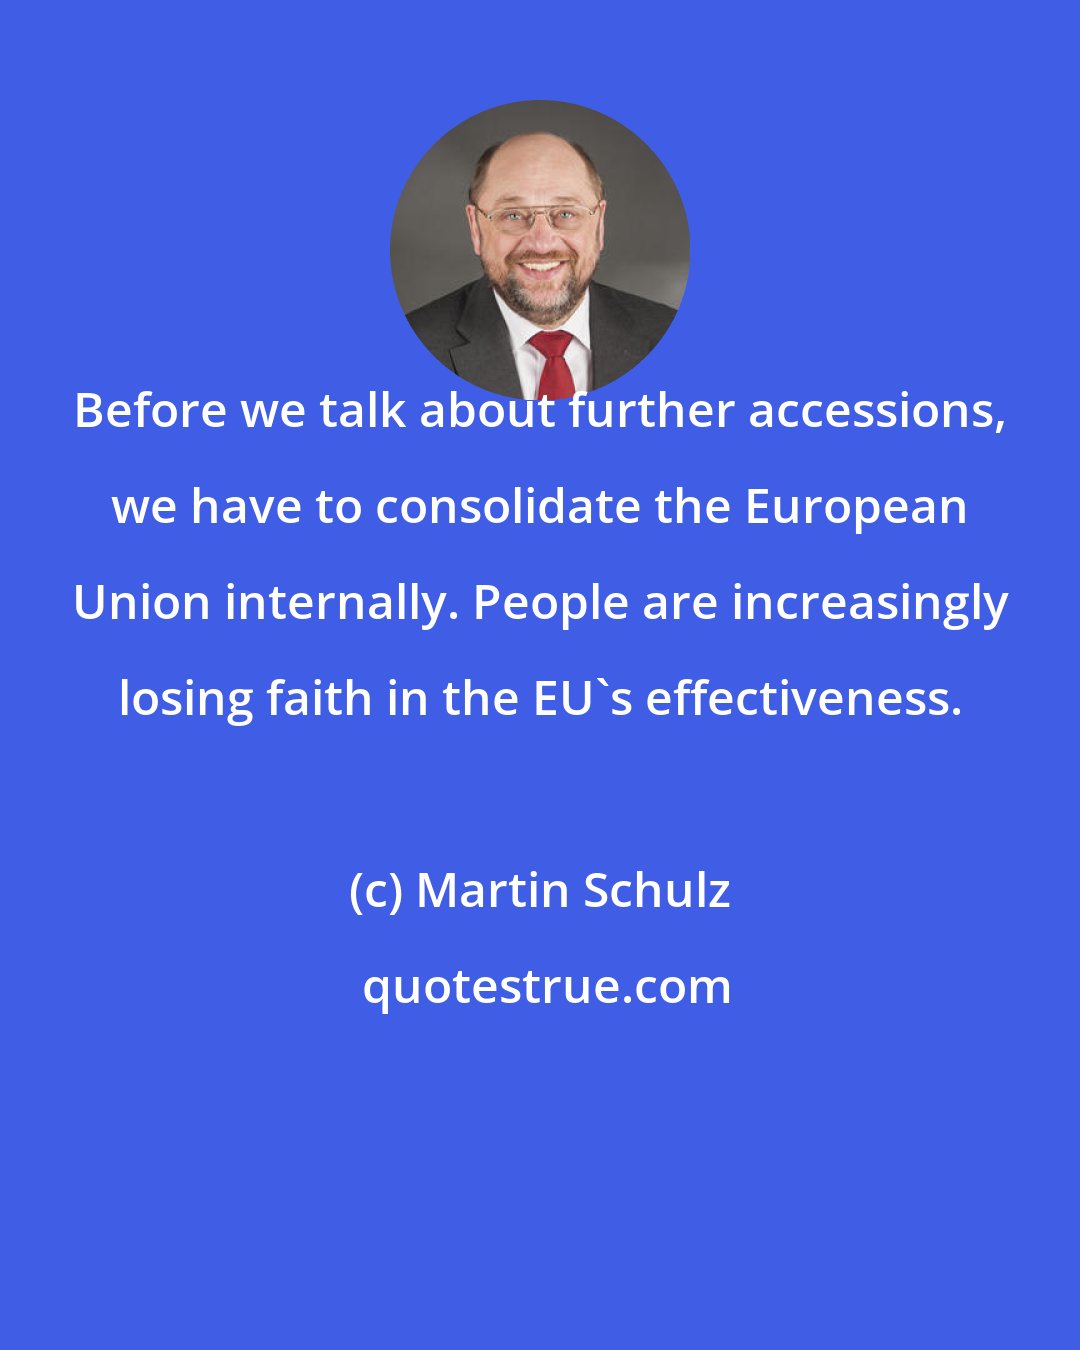 Martin Schulz: Before we talk about further accessions, we have to consolidate the European Union internally. People are increasingly losing faith in the EU's effectiveness.